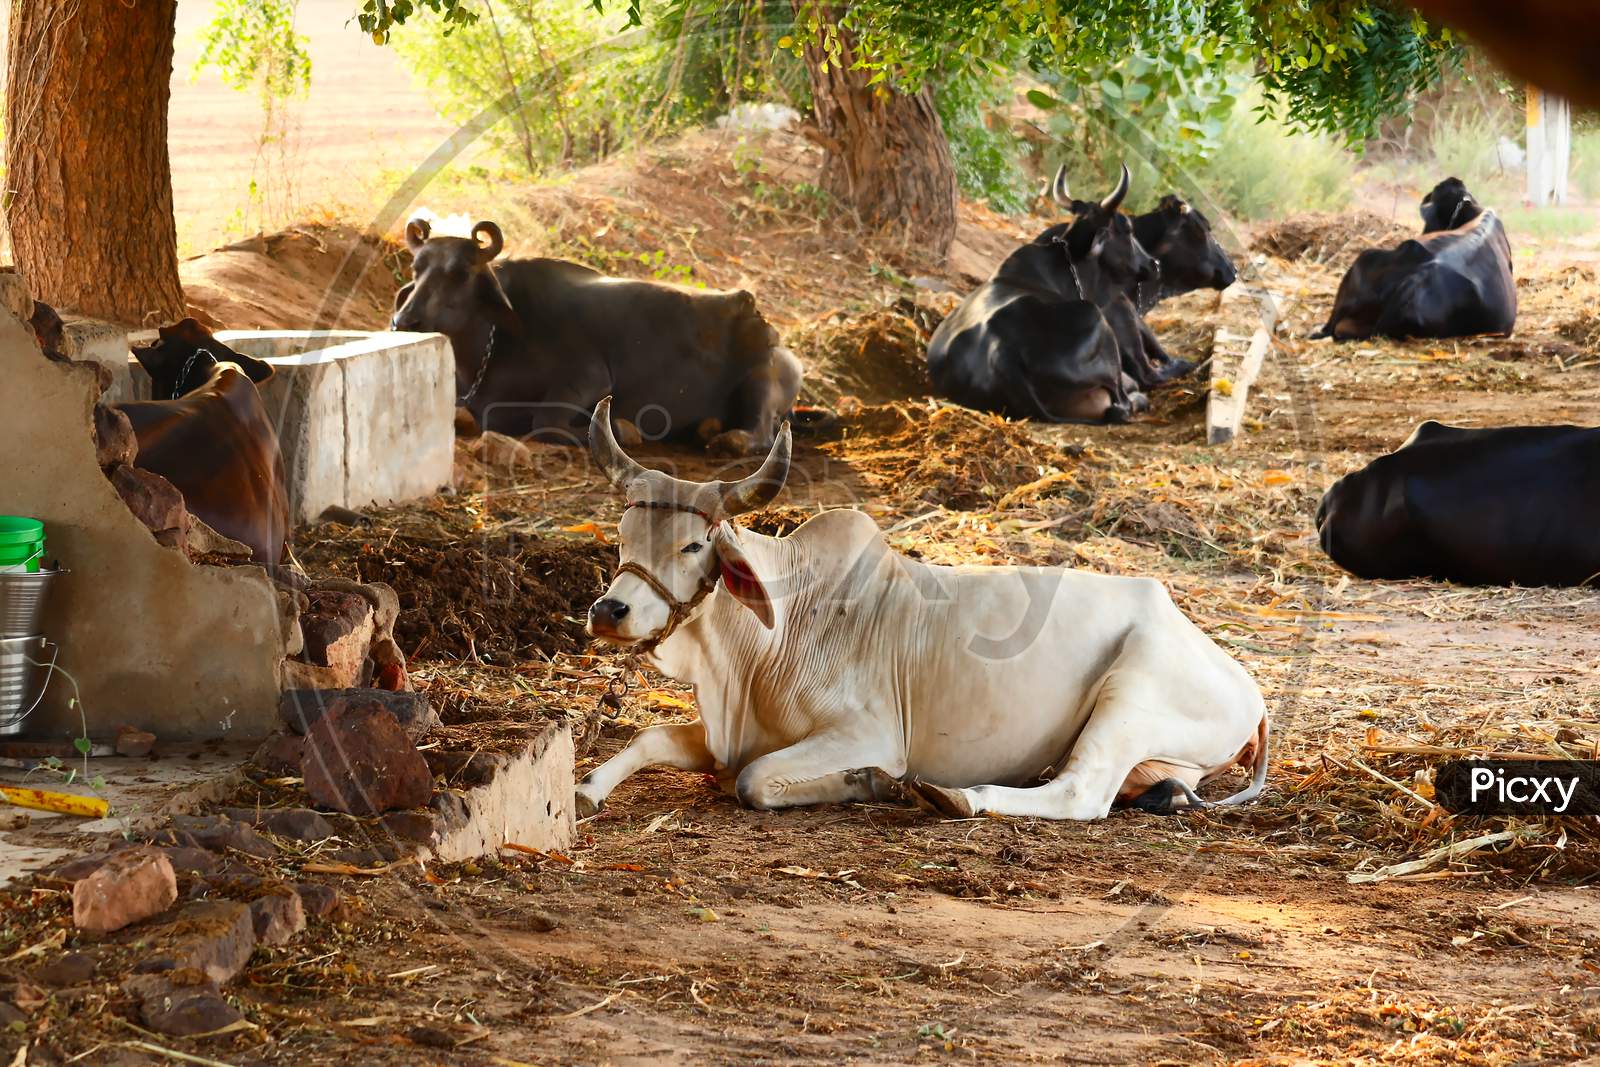 Indian Cow Cattle And Buffalo Baby In Farm,Cattle Shed Rural India,Indian Countryside With Baby Cow And Buffalo, Farming And Dairy Products Concept,